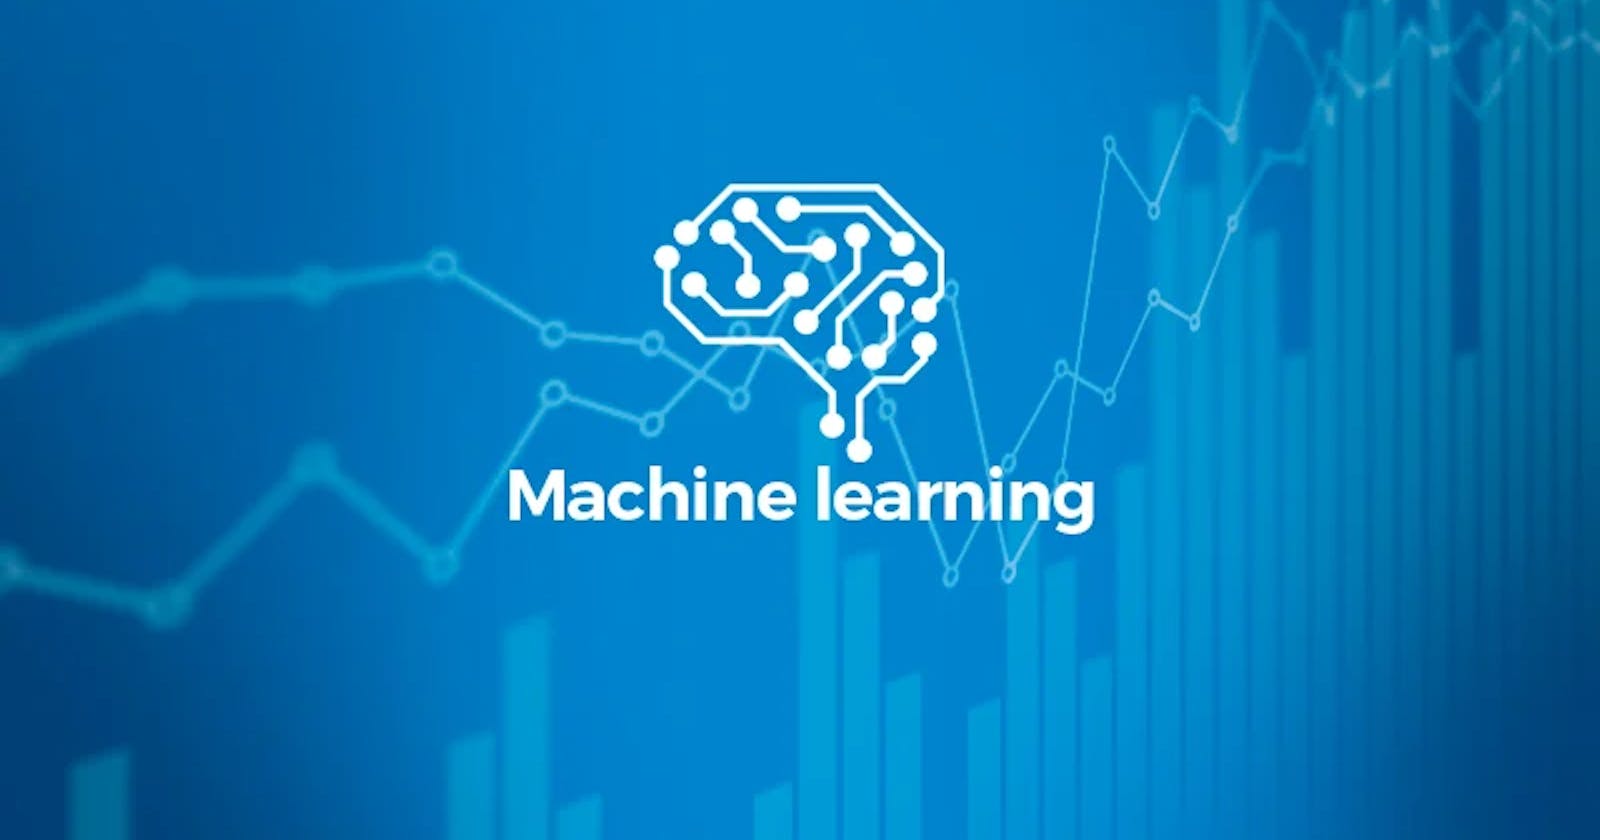 Why should you dive into Machine Learning?